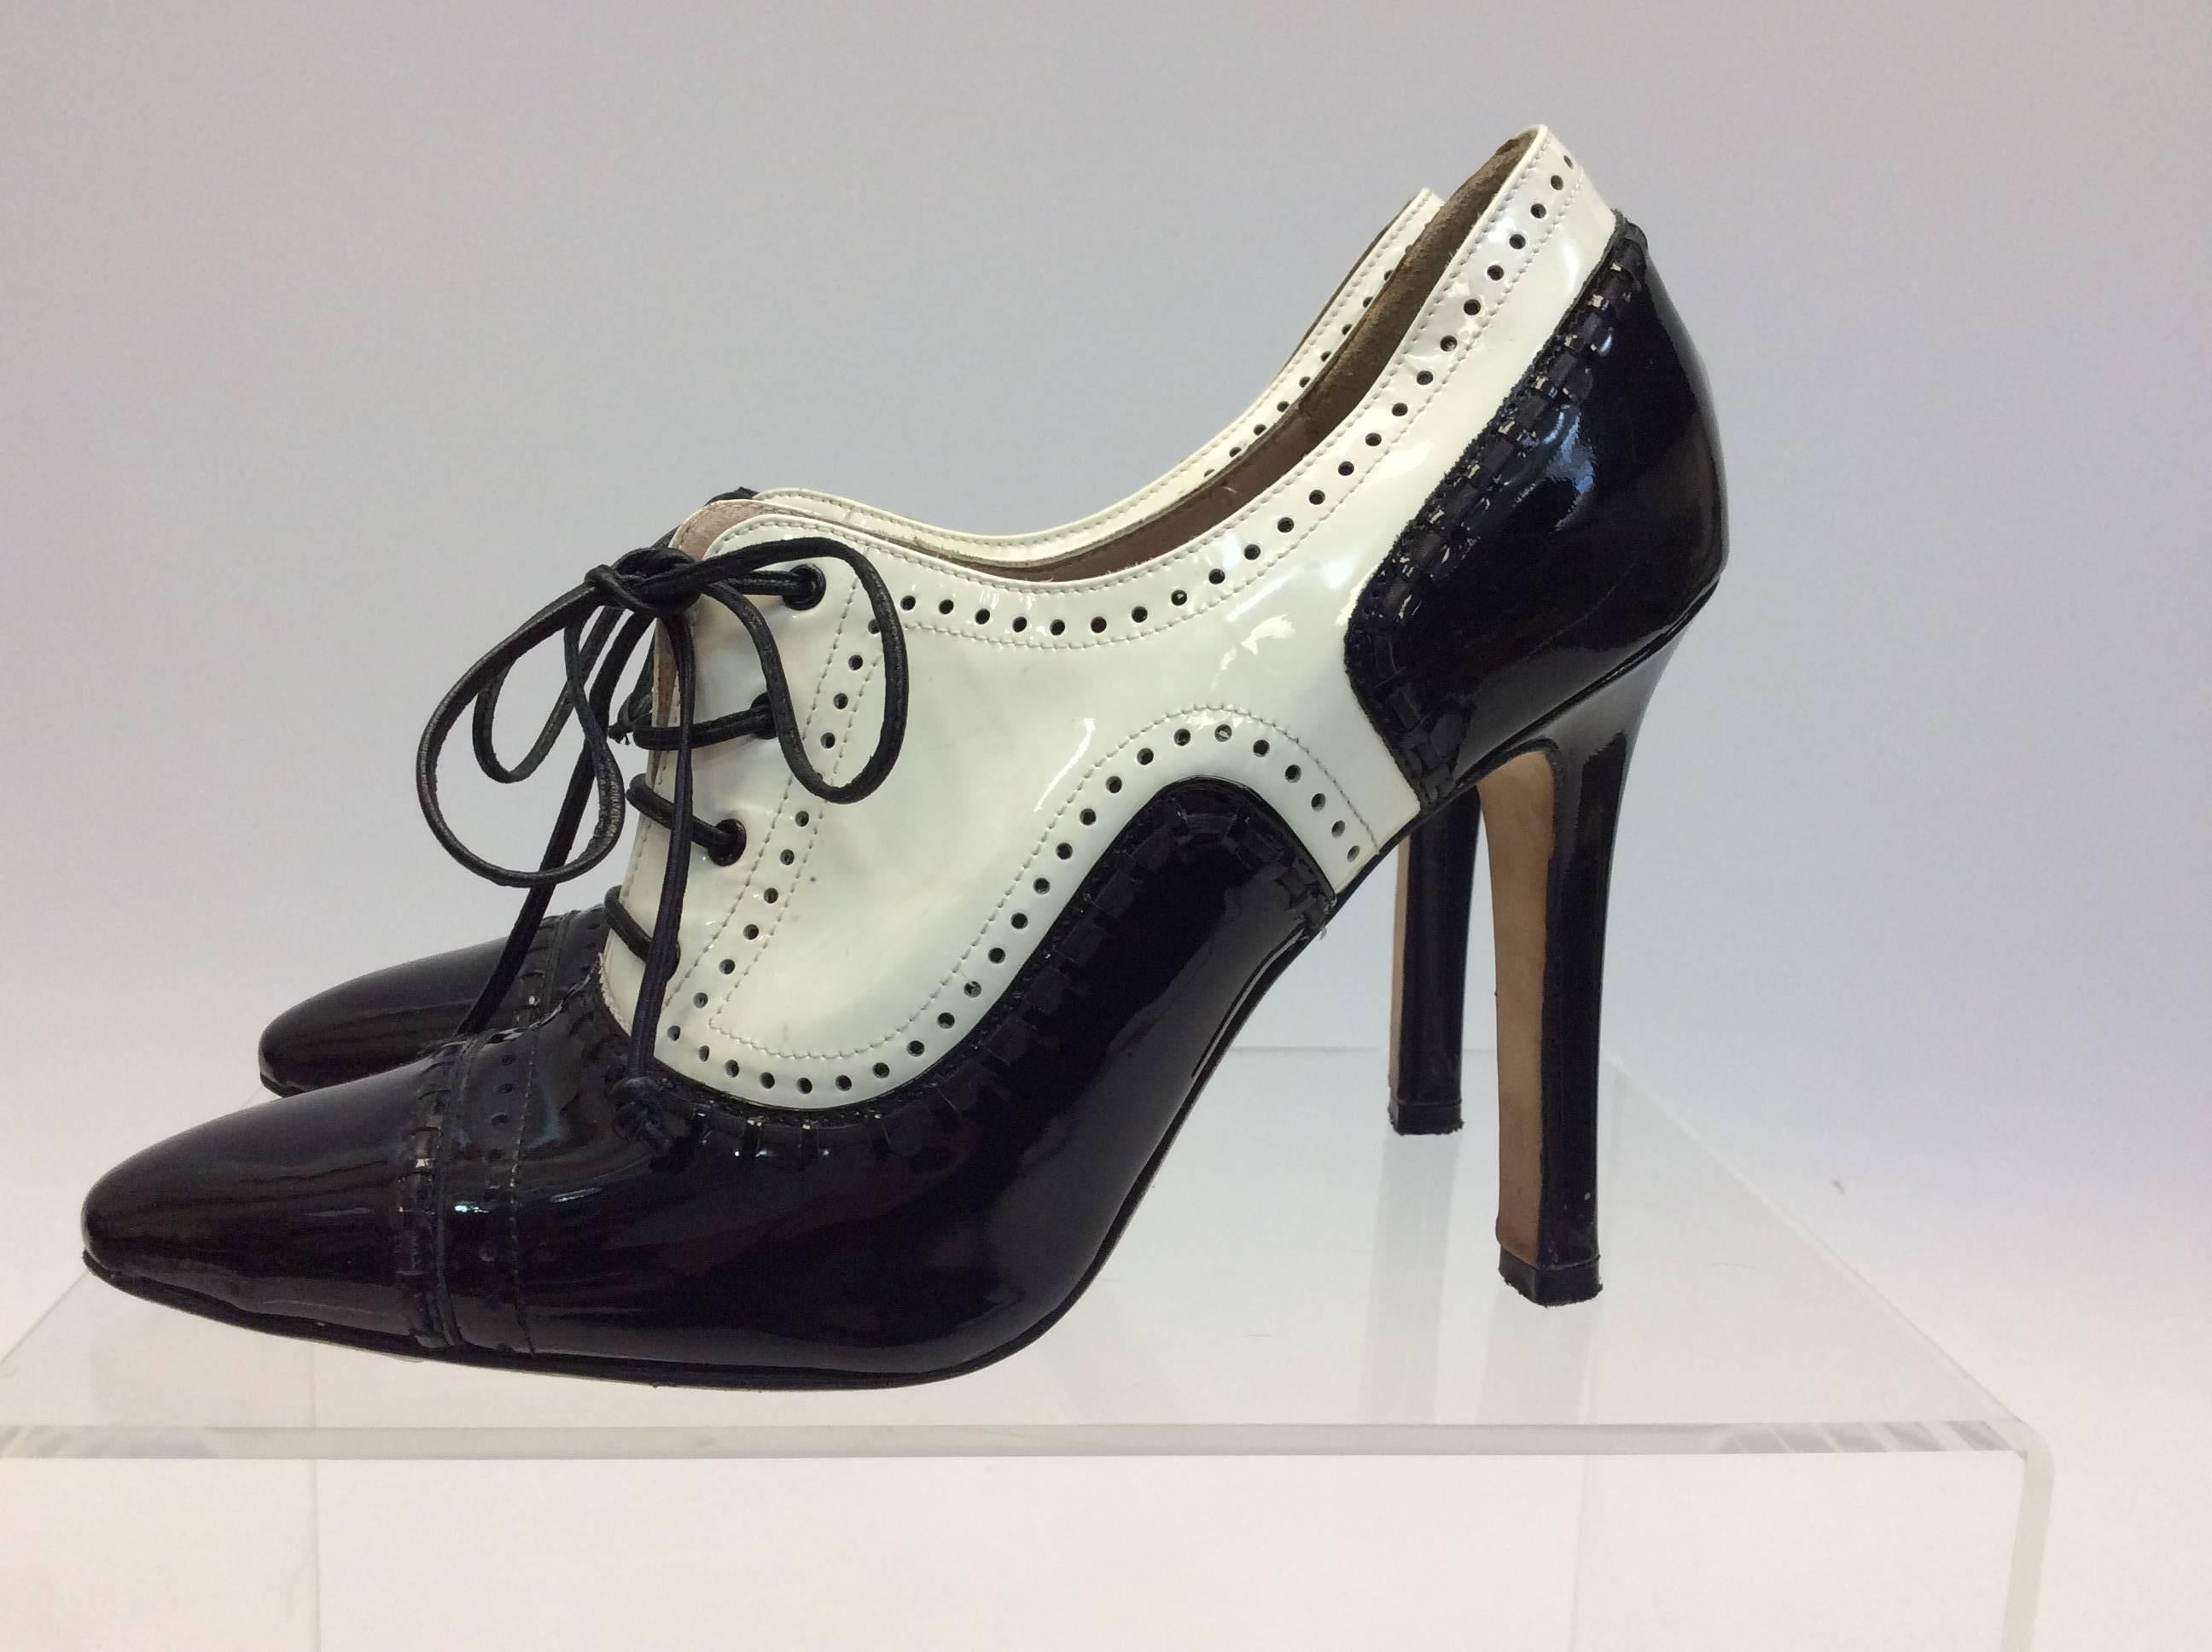 Manolo Blahnik Black and White Patent Oxford Heels
Patent Leather
$225
Size 36
4